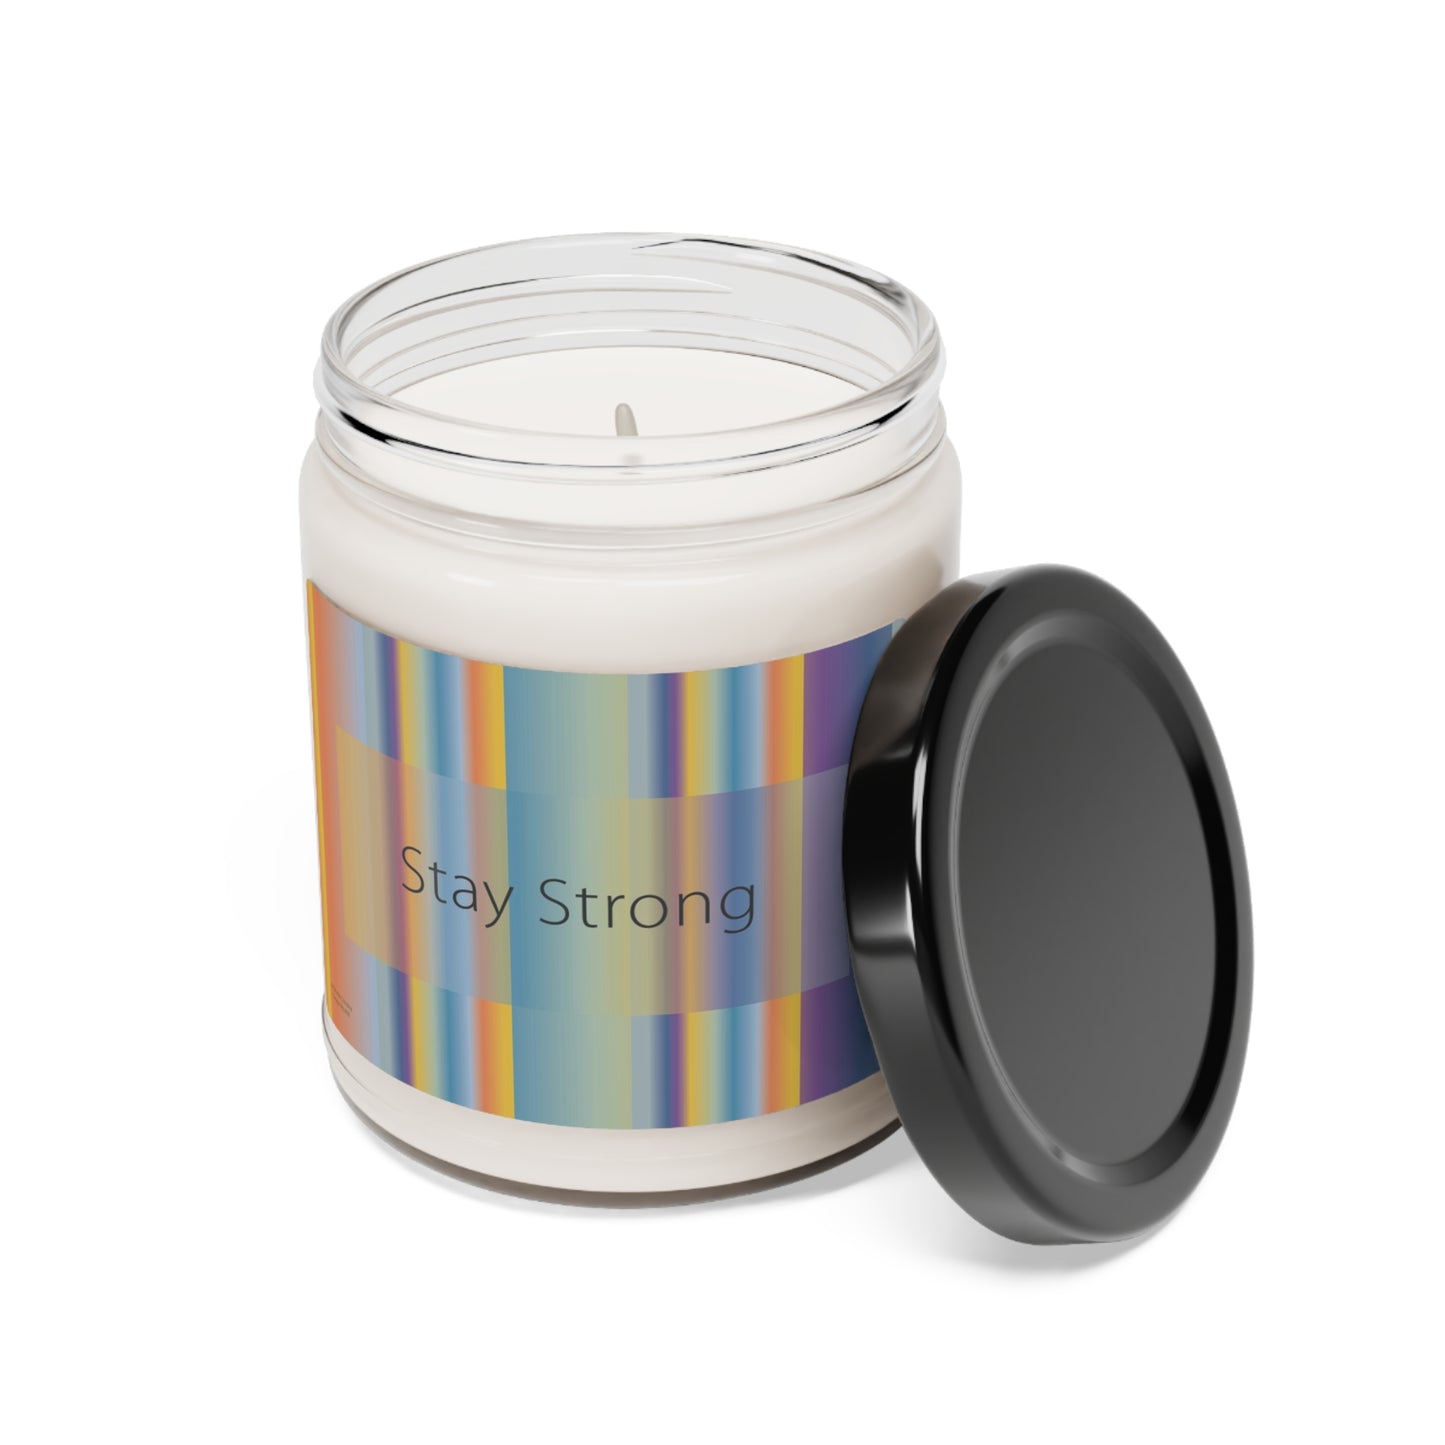 Scented Soy Candle, 9oz Stay Strong - Design No.400